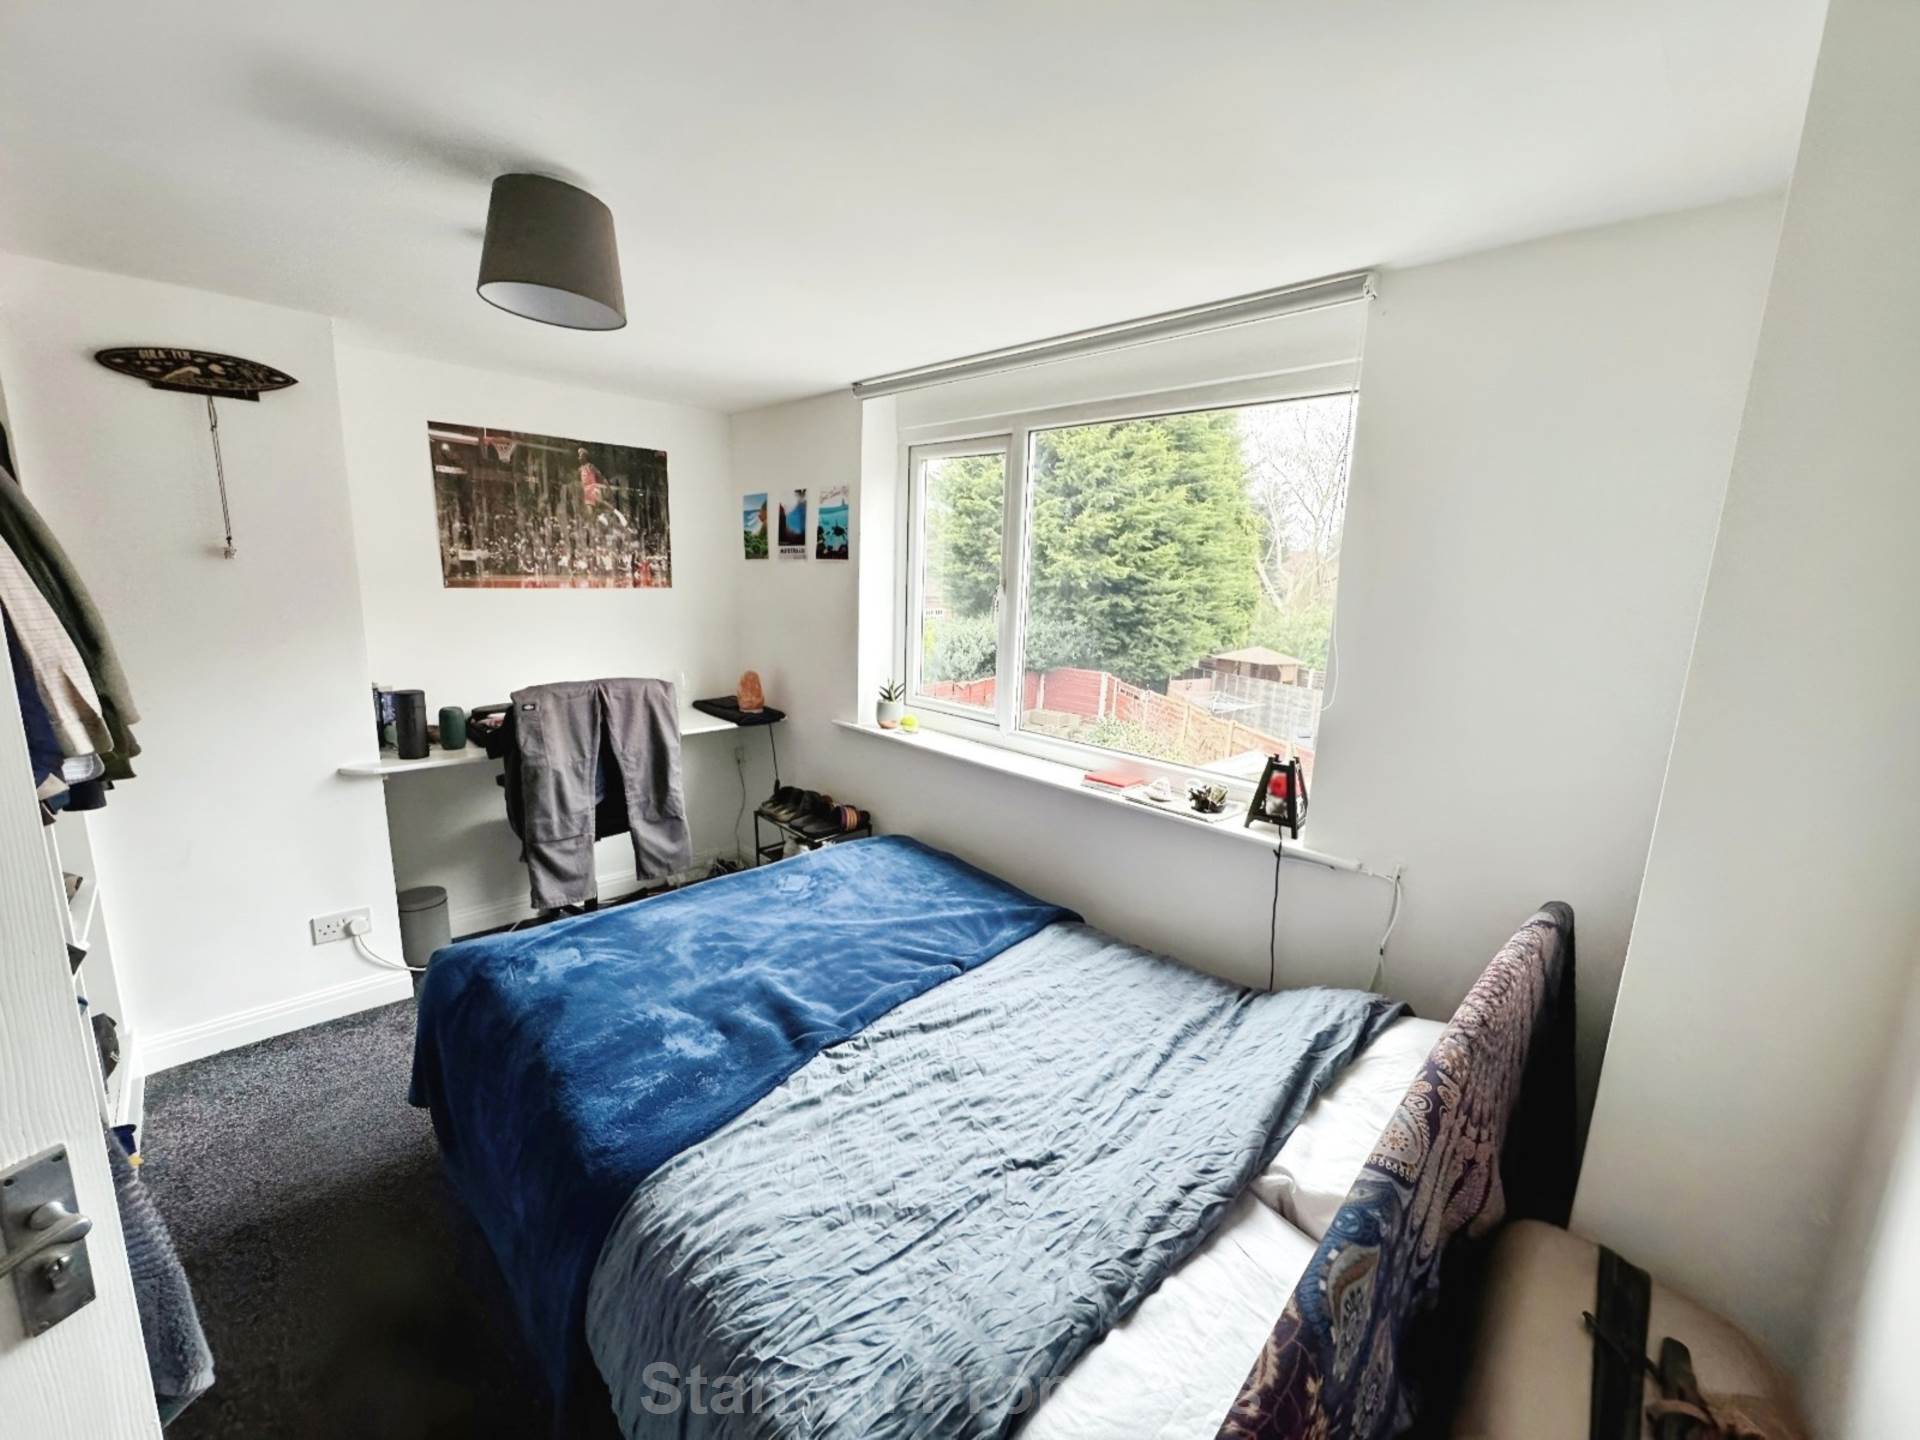 £150 PPPW INCLUDING ALL BILLS, Cotton Lane, Withington, Image 11